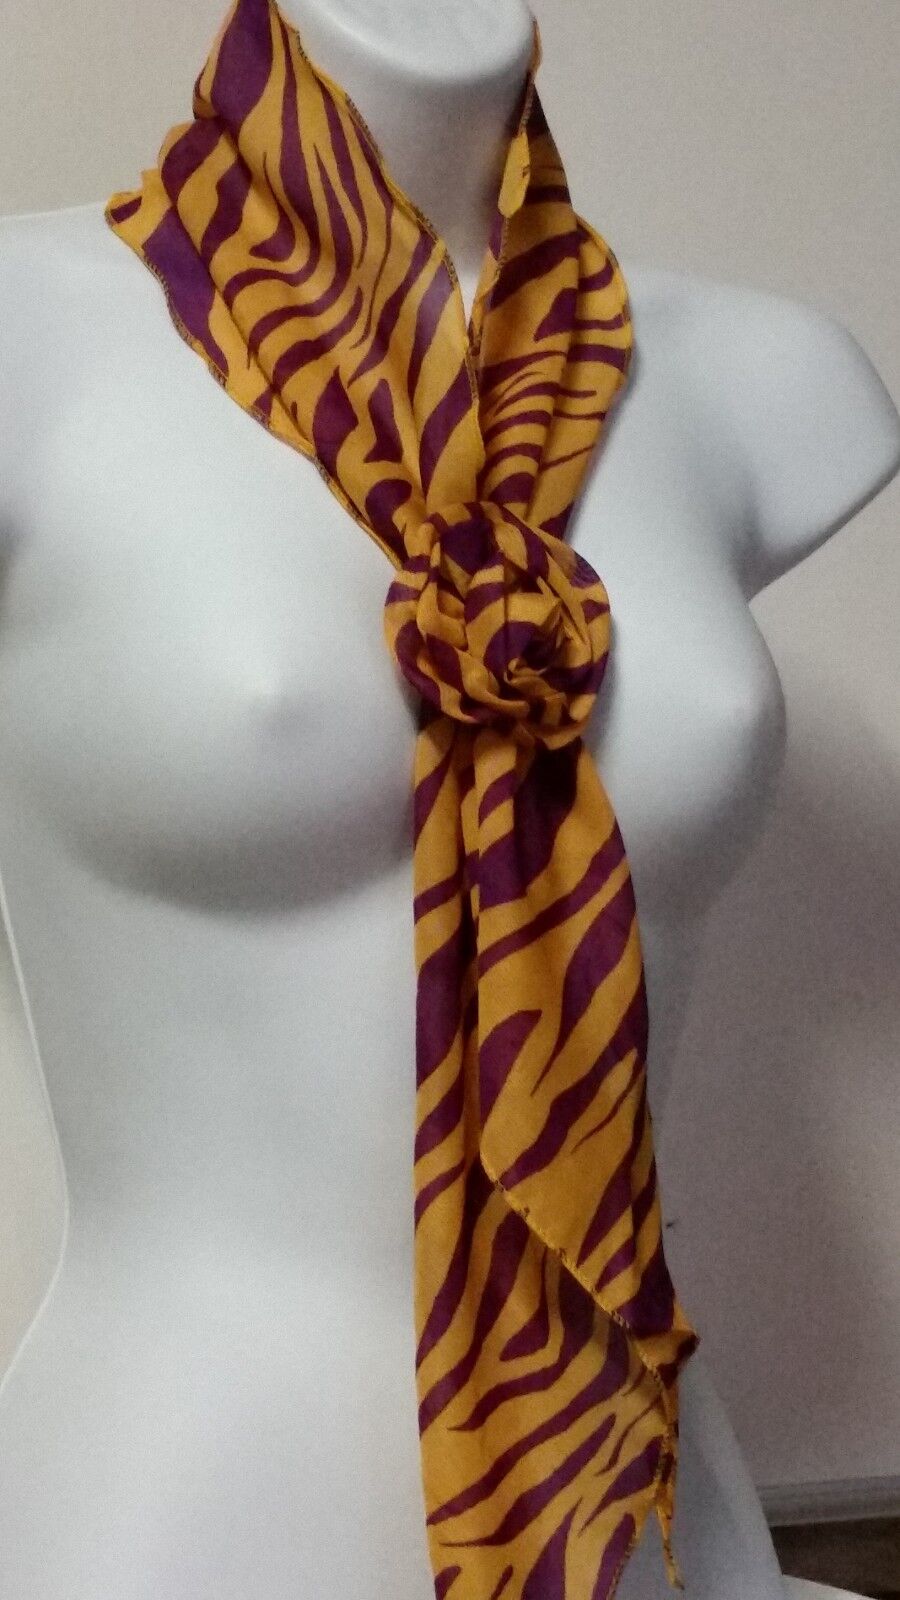 LSU Scarf with Clip - Purple and Gold and Tiger Stripes. GEAUX Tigers